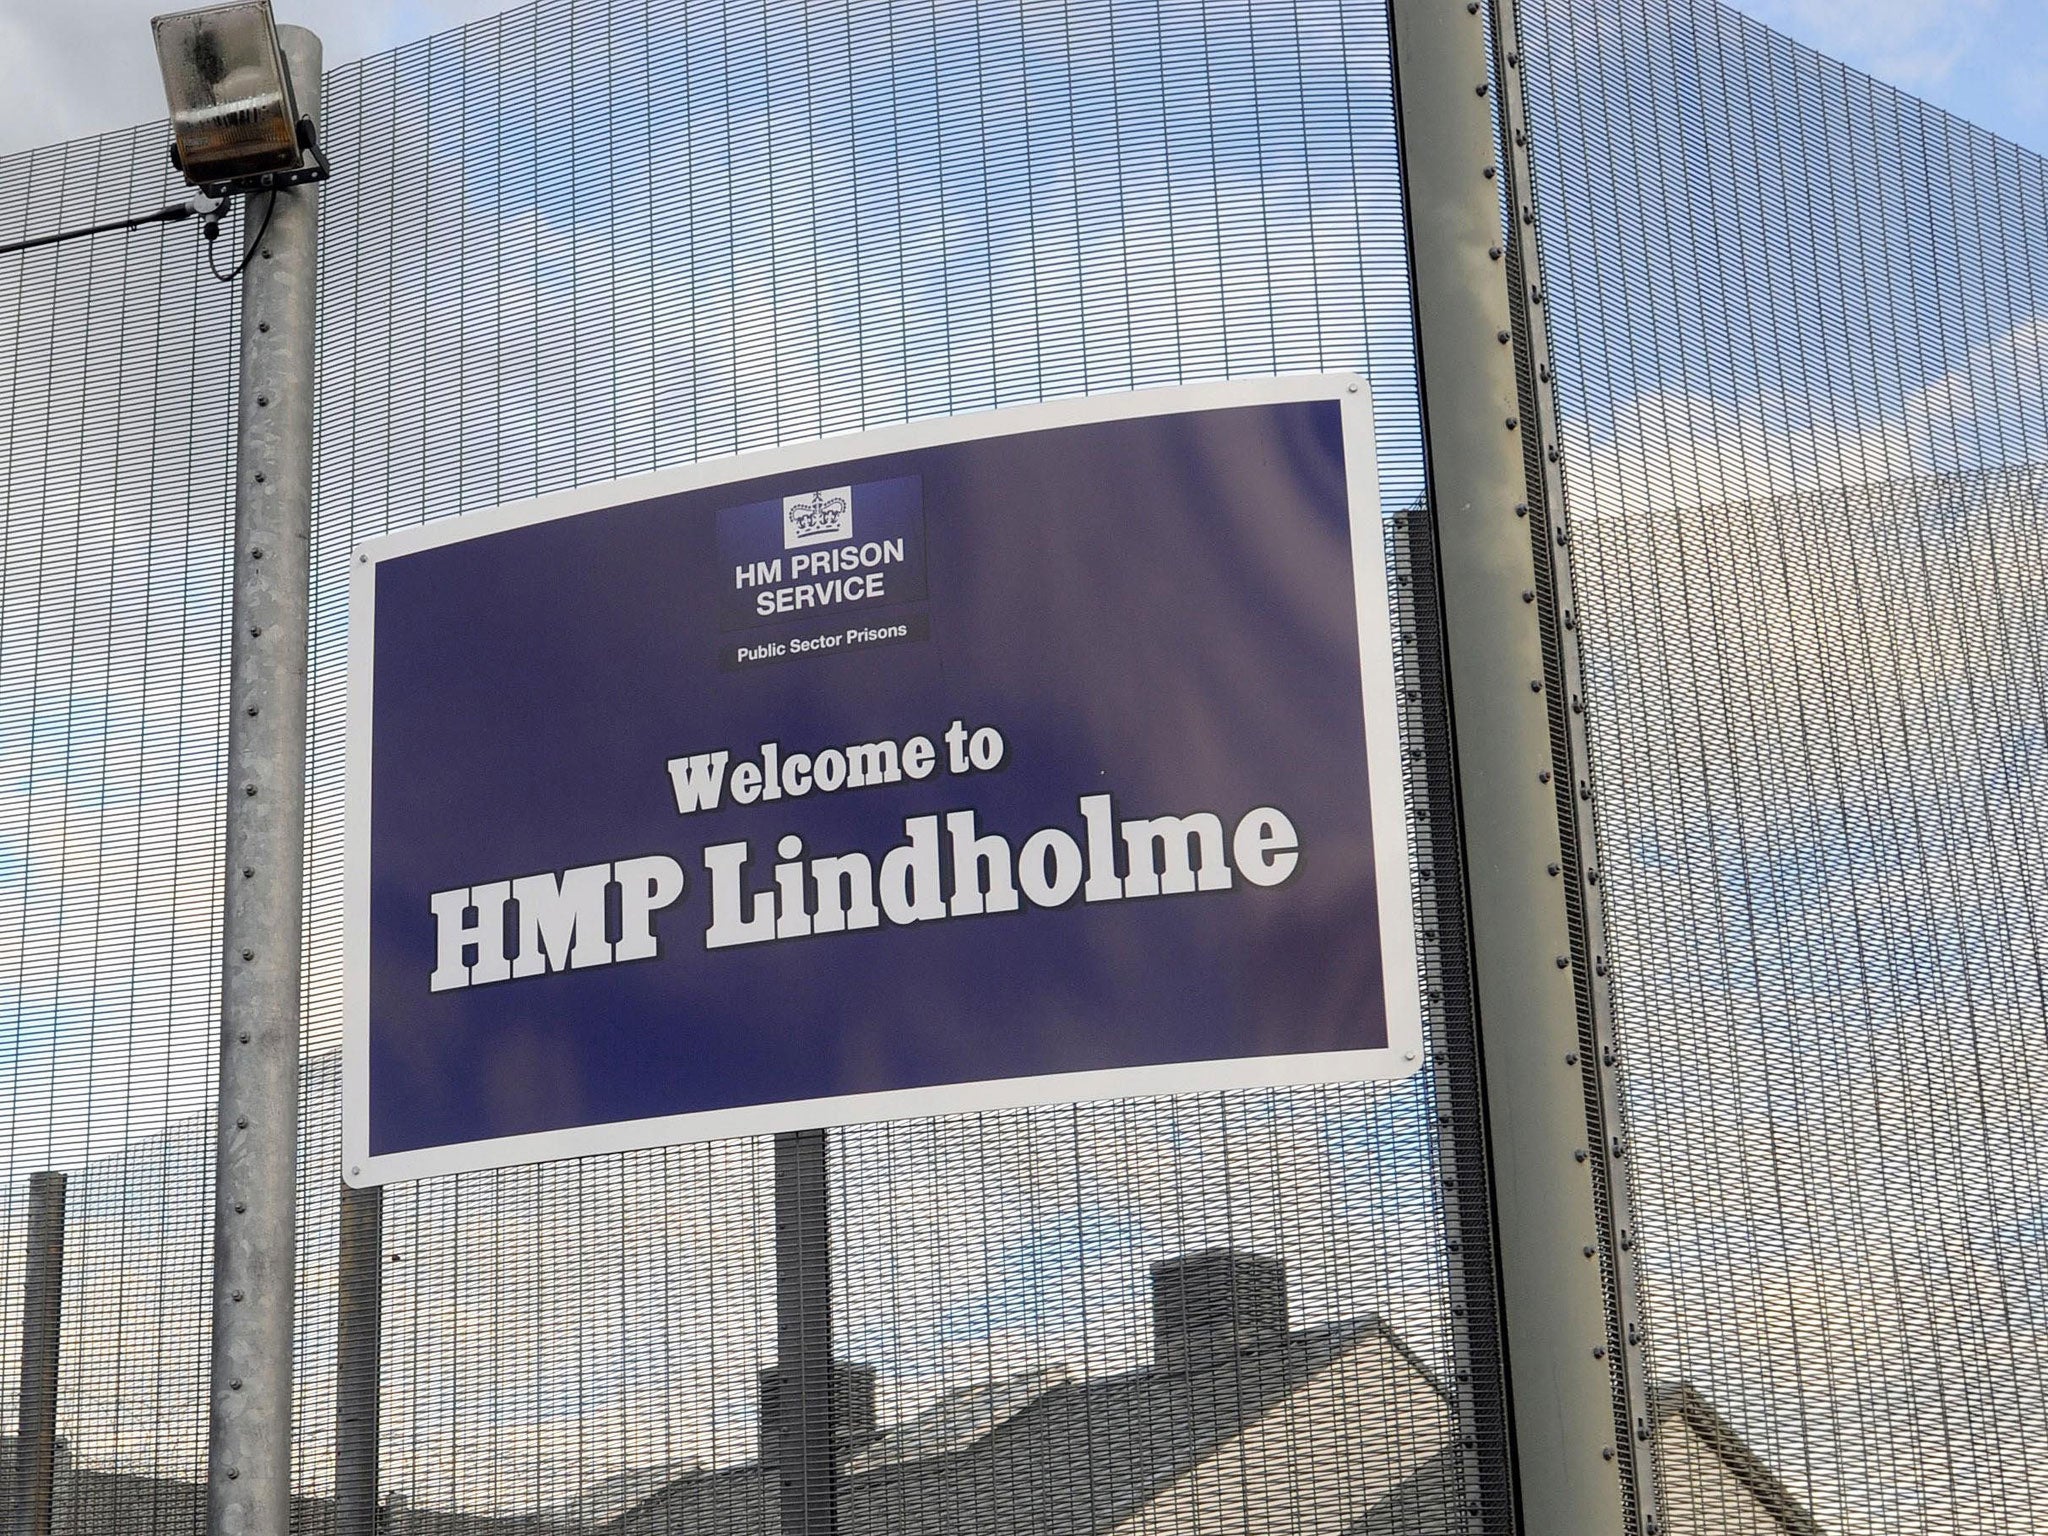 A prison officer was strangled until he fell unconscious on Thursday